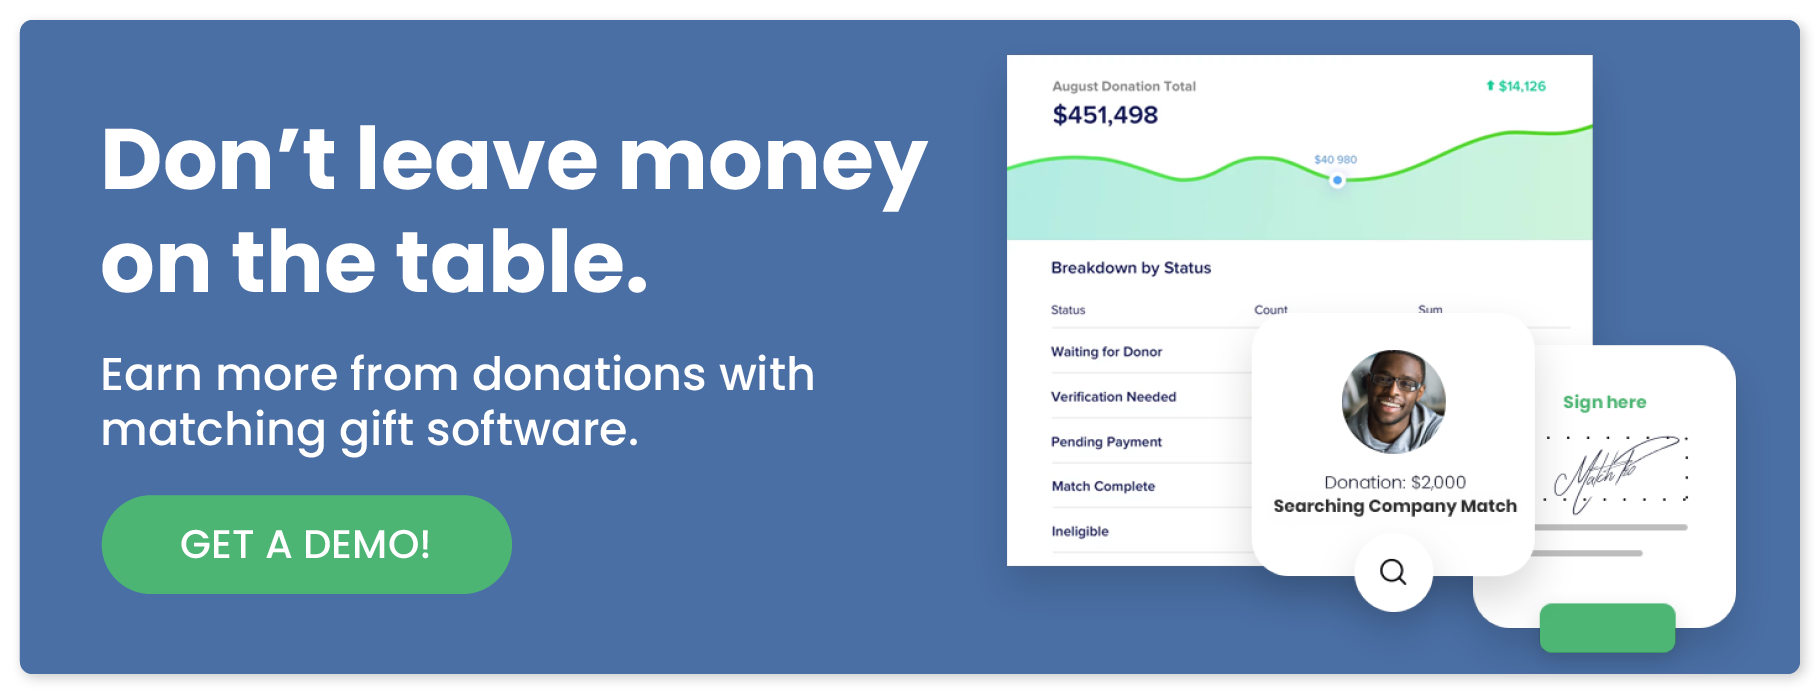 Don't leave money on the table. Earn more from donations with matching gift software. Get a demo.